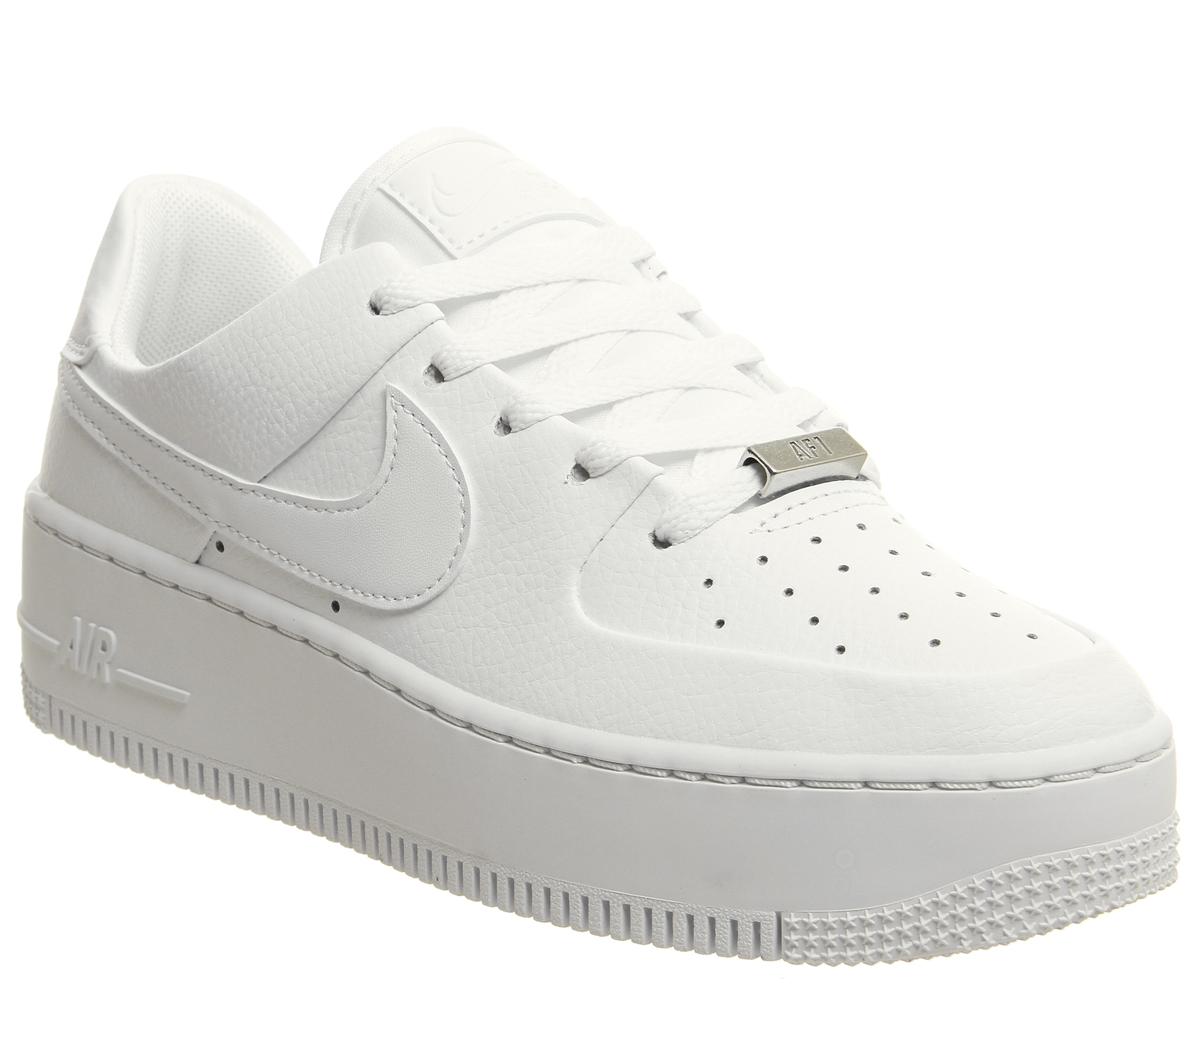 Nike Air Force 1 Sage White - Hers trainers